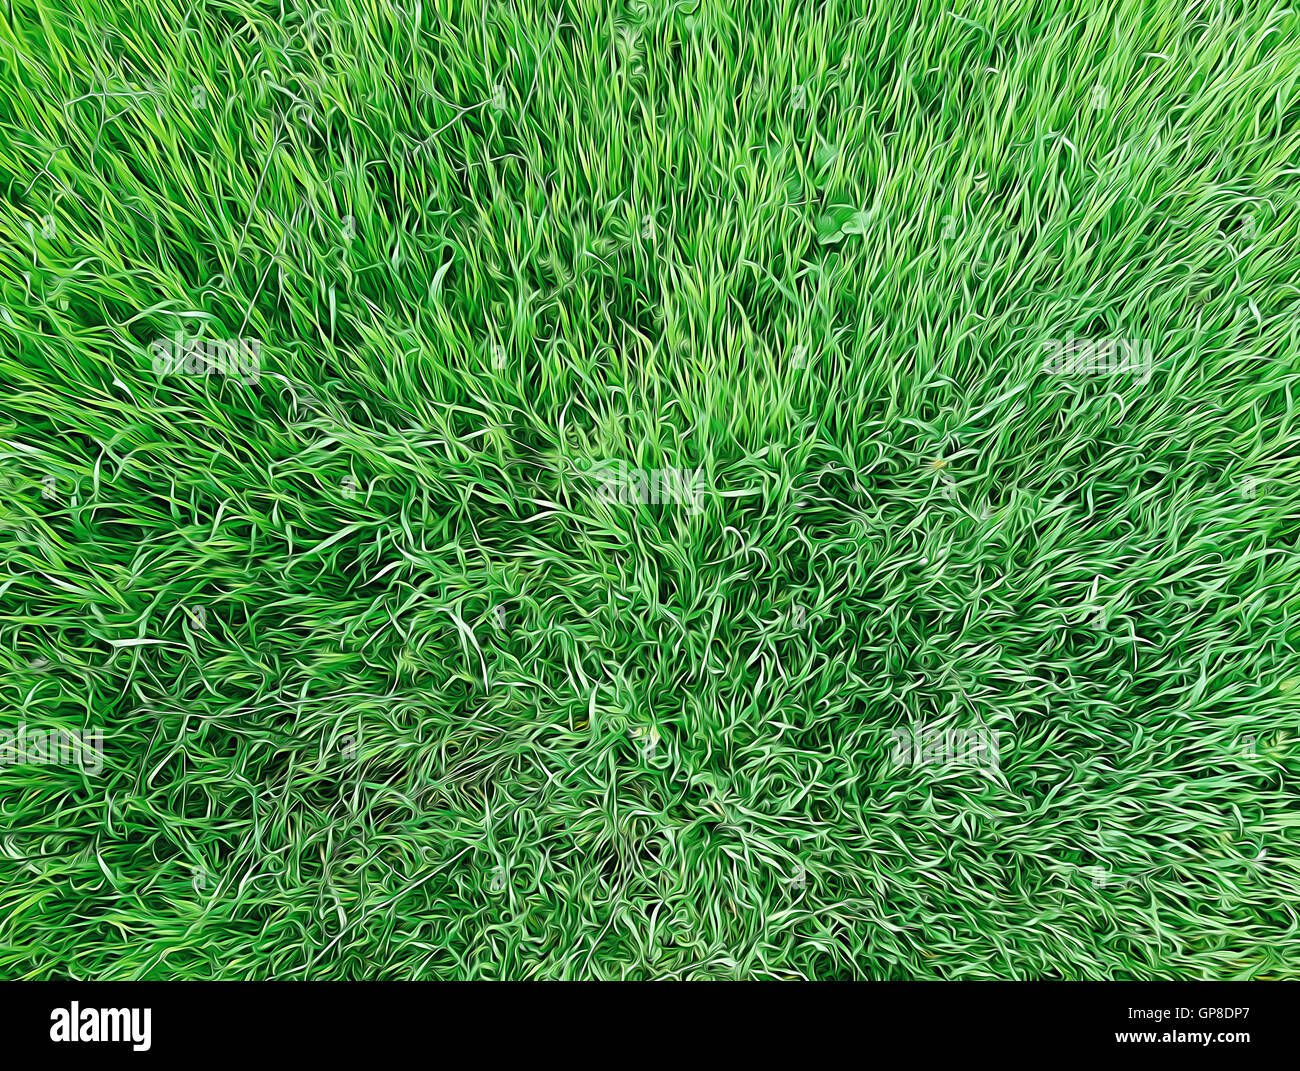 Green grass lawn background Stock Photo